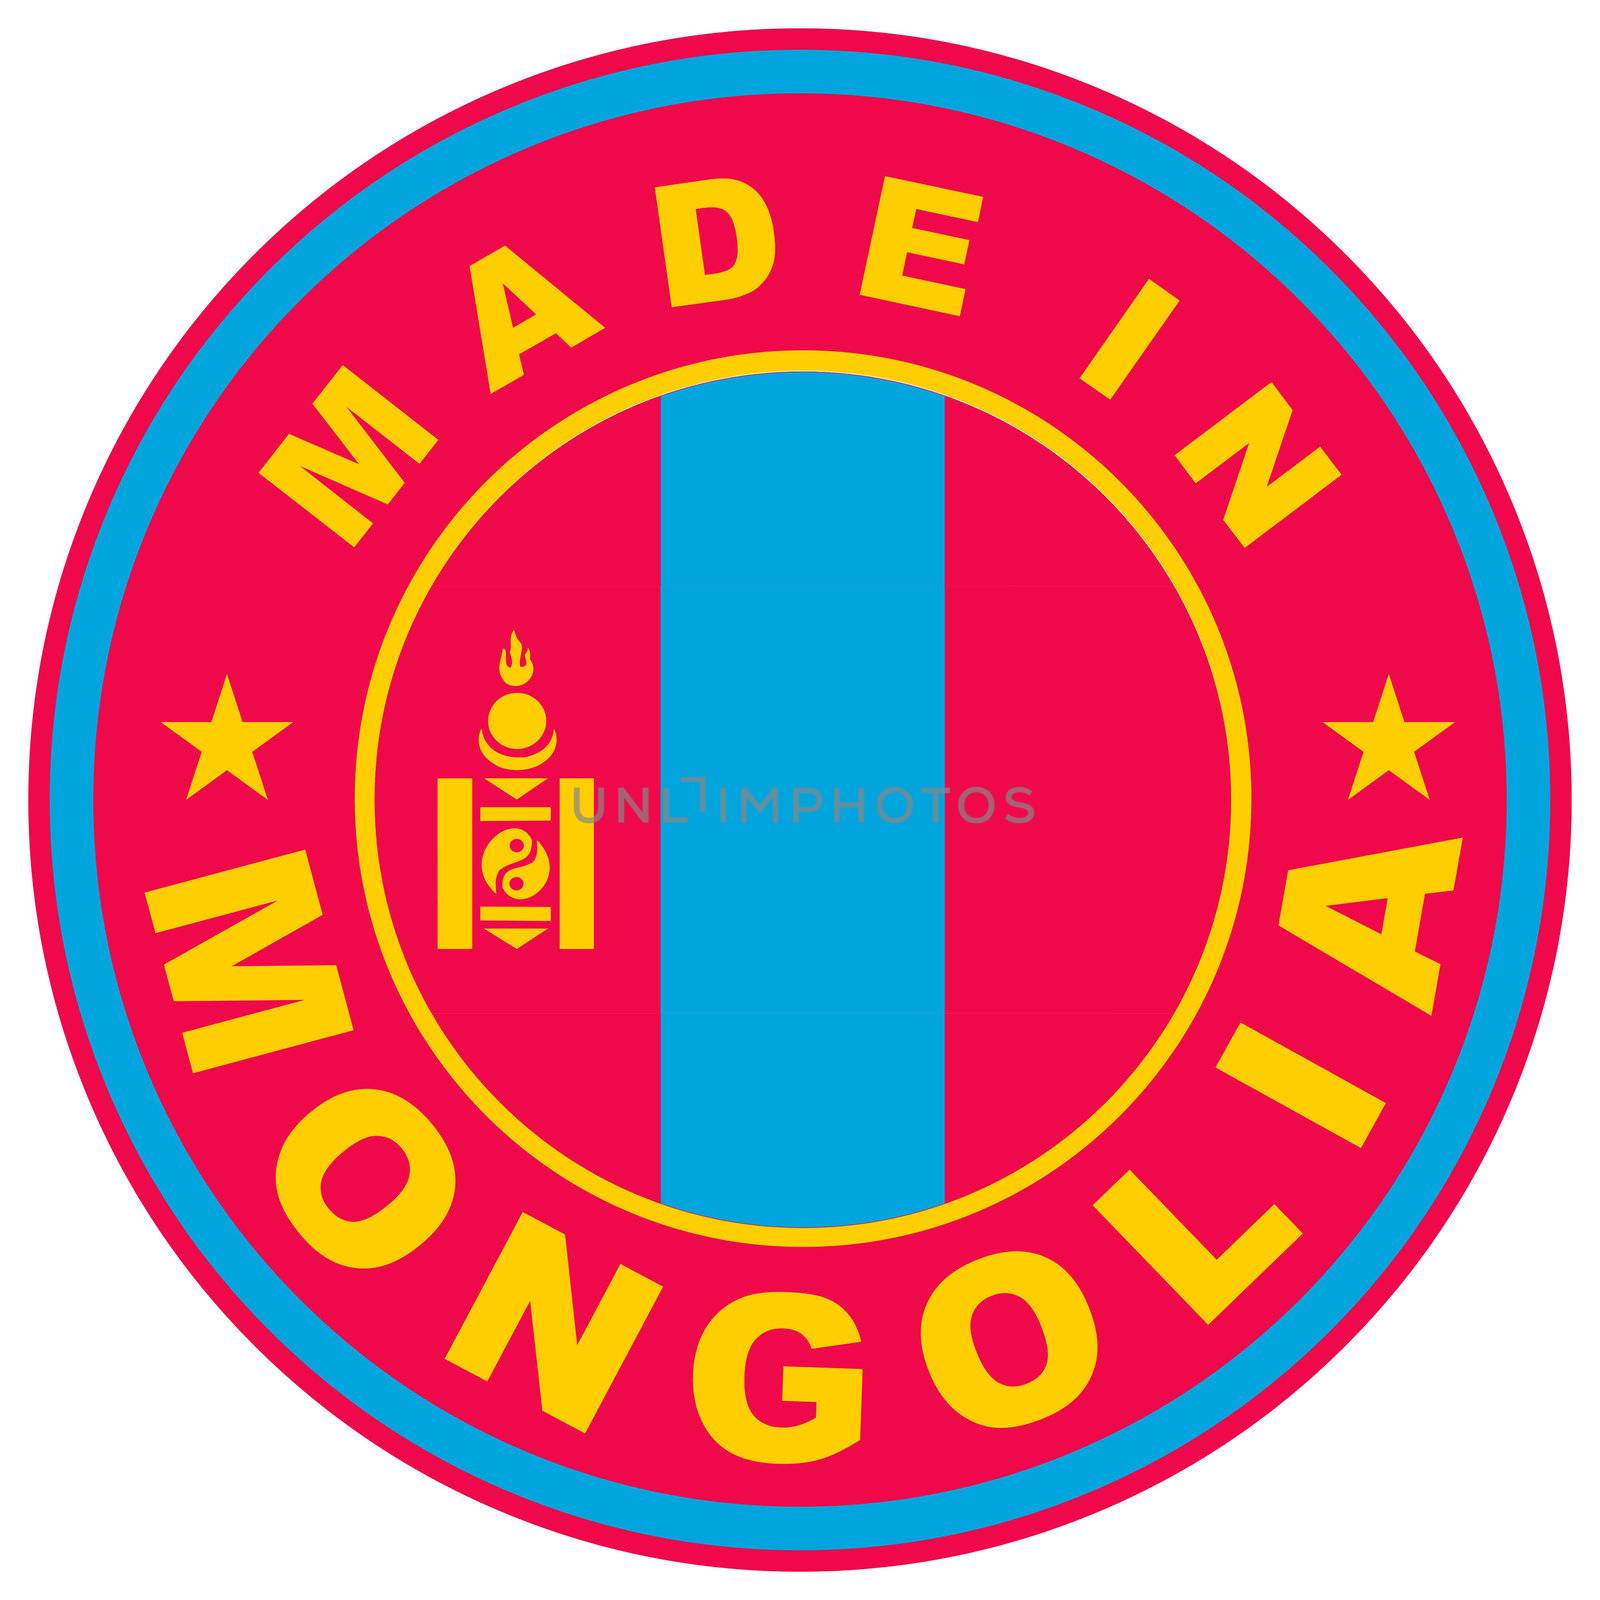 made in mongolia by tony4urban